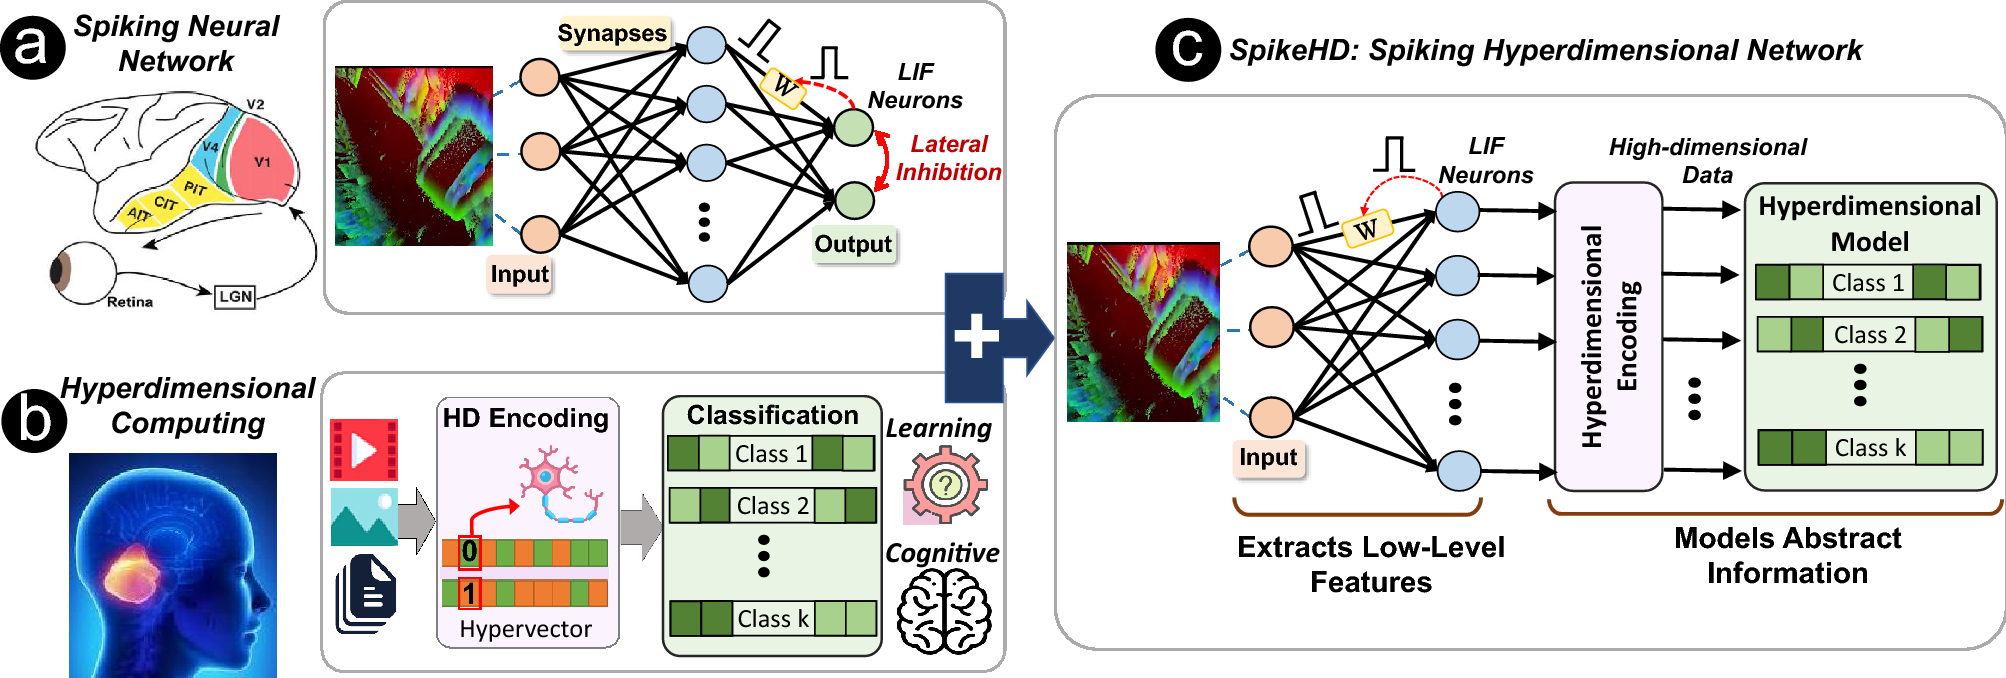 Memory-inspired spiking hyperdimensional network for robust online learning  | Scientific Reports